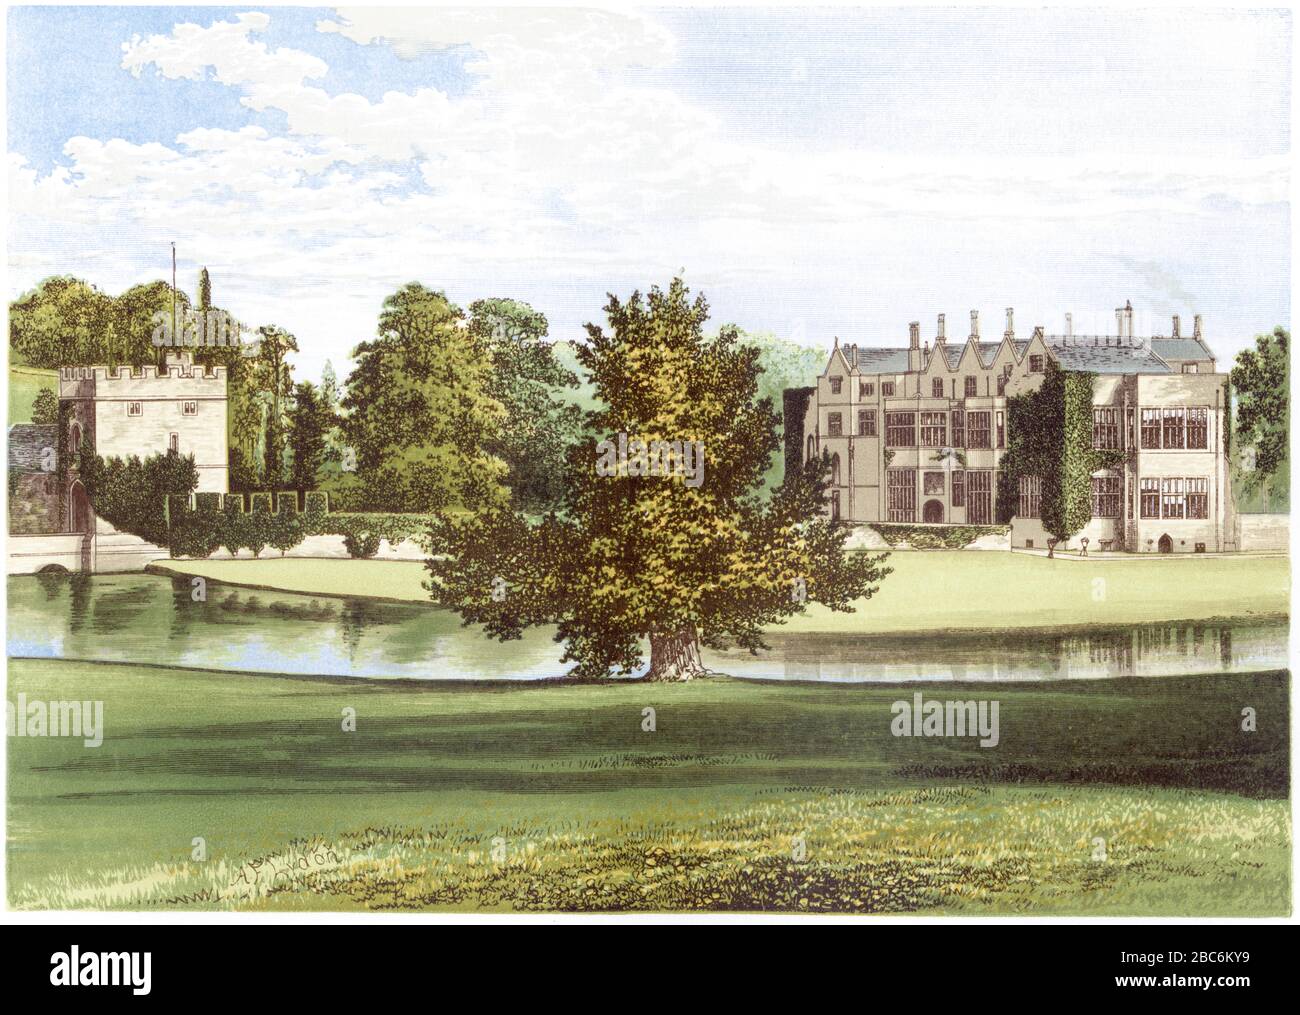 Coloured illustration of Broughton Castle near Banbury, Oxfordshire scanned at high resolution from a book printed in 1870. Believed copyright free. Stock Photo